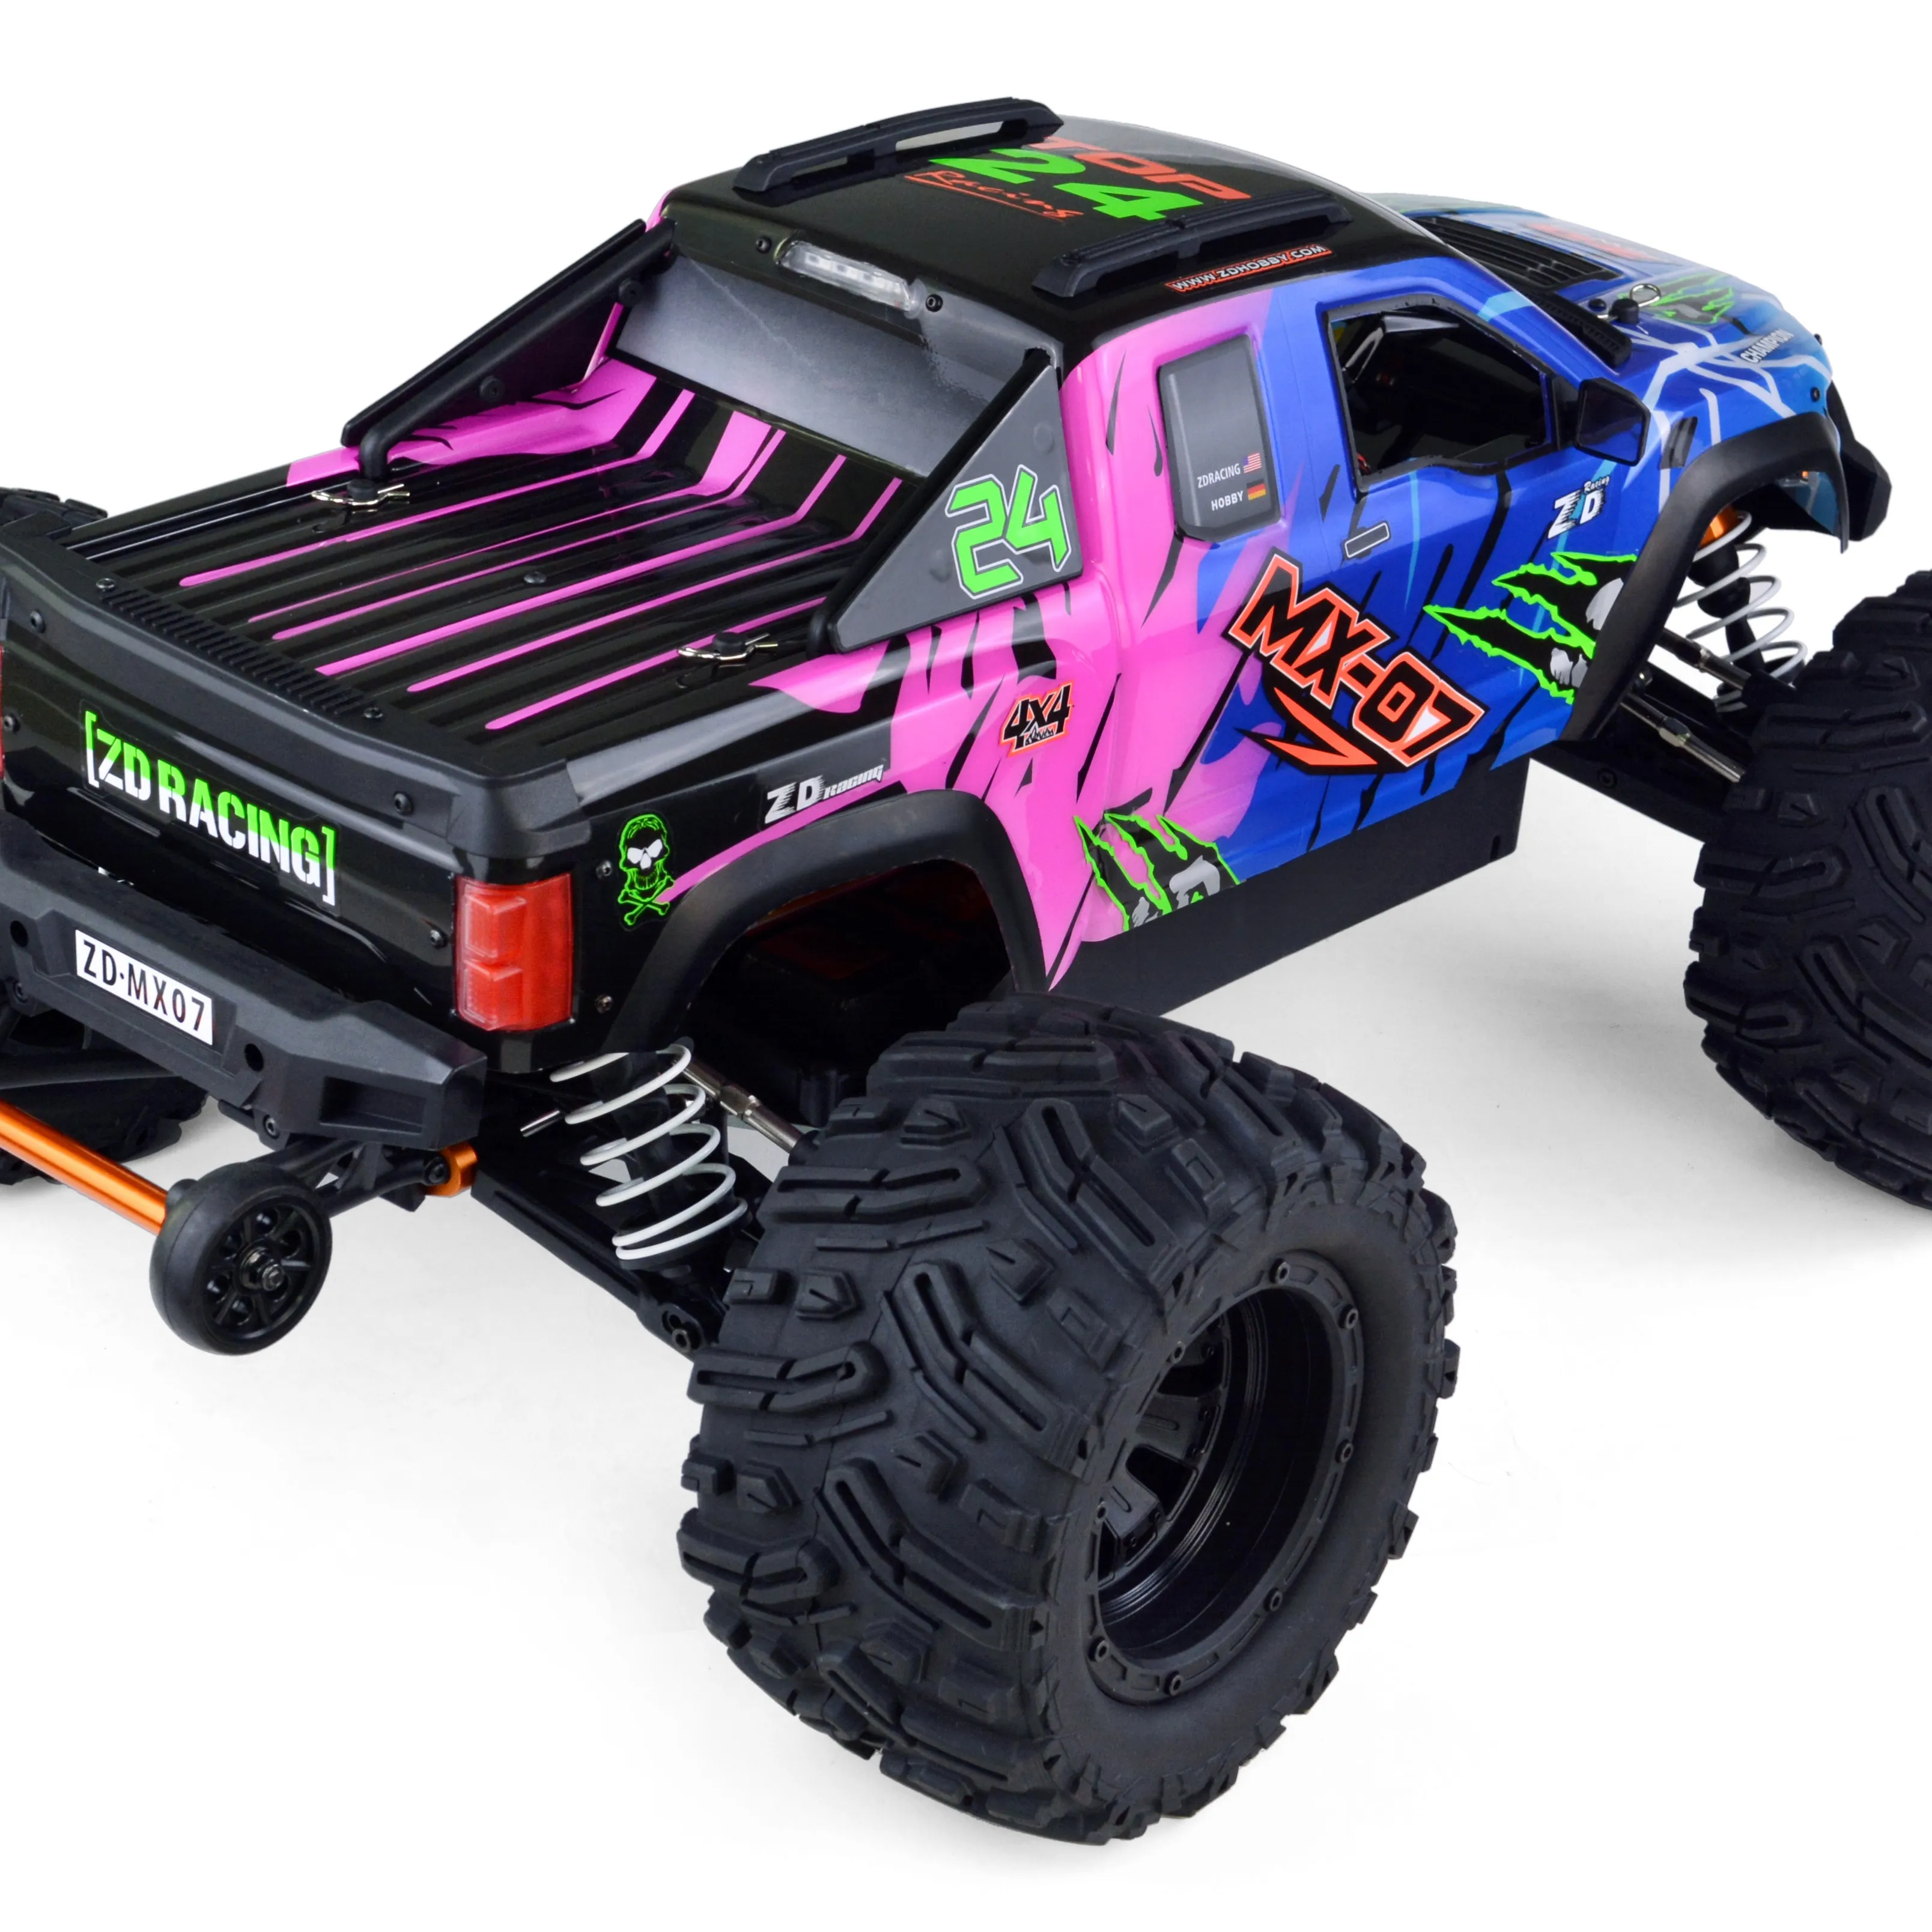 ZD Racing Rockrt-RC MX-07 1/7 Scale 4WD Brushless Electric Off-road Monster Truck 90KM/h High Speed Remote Control RC Car